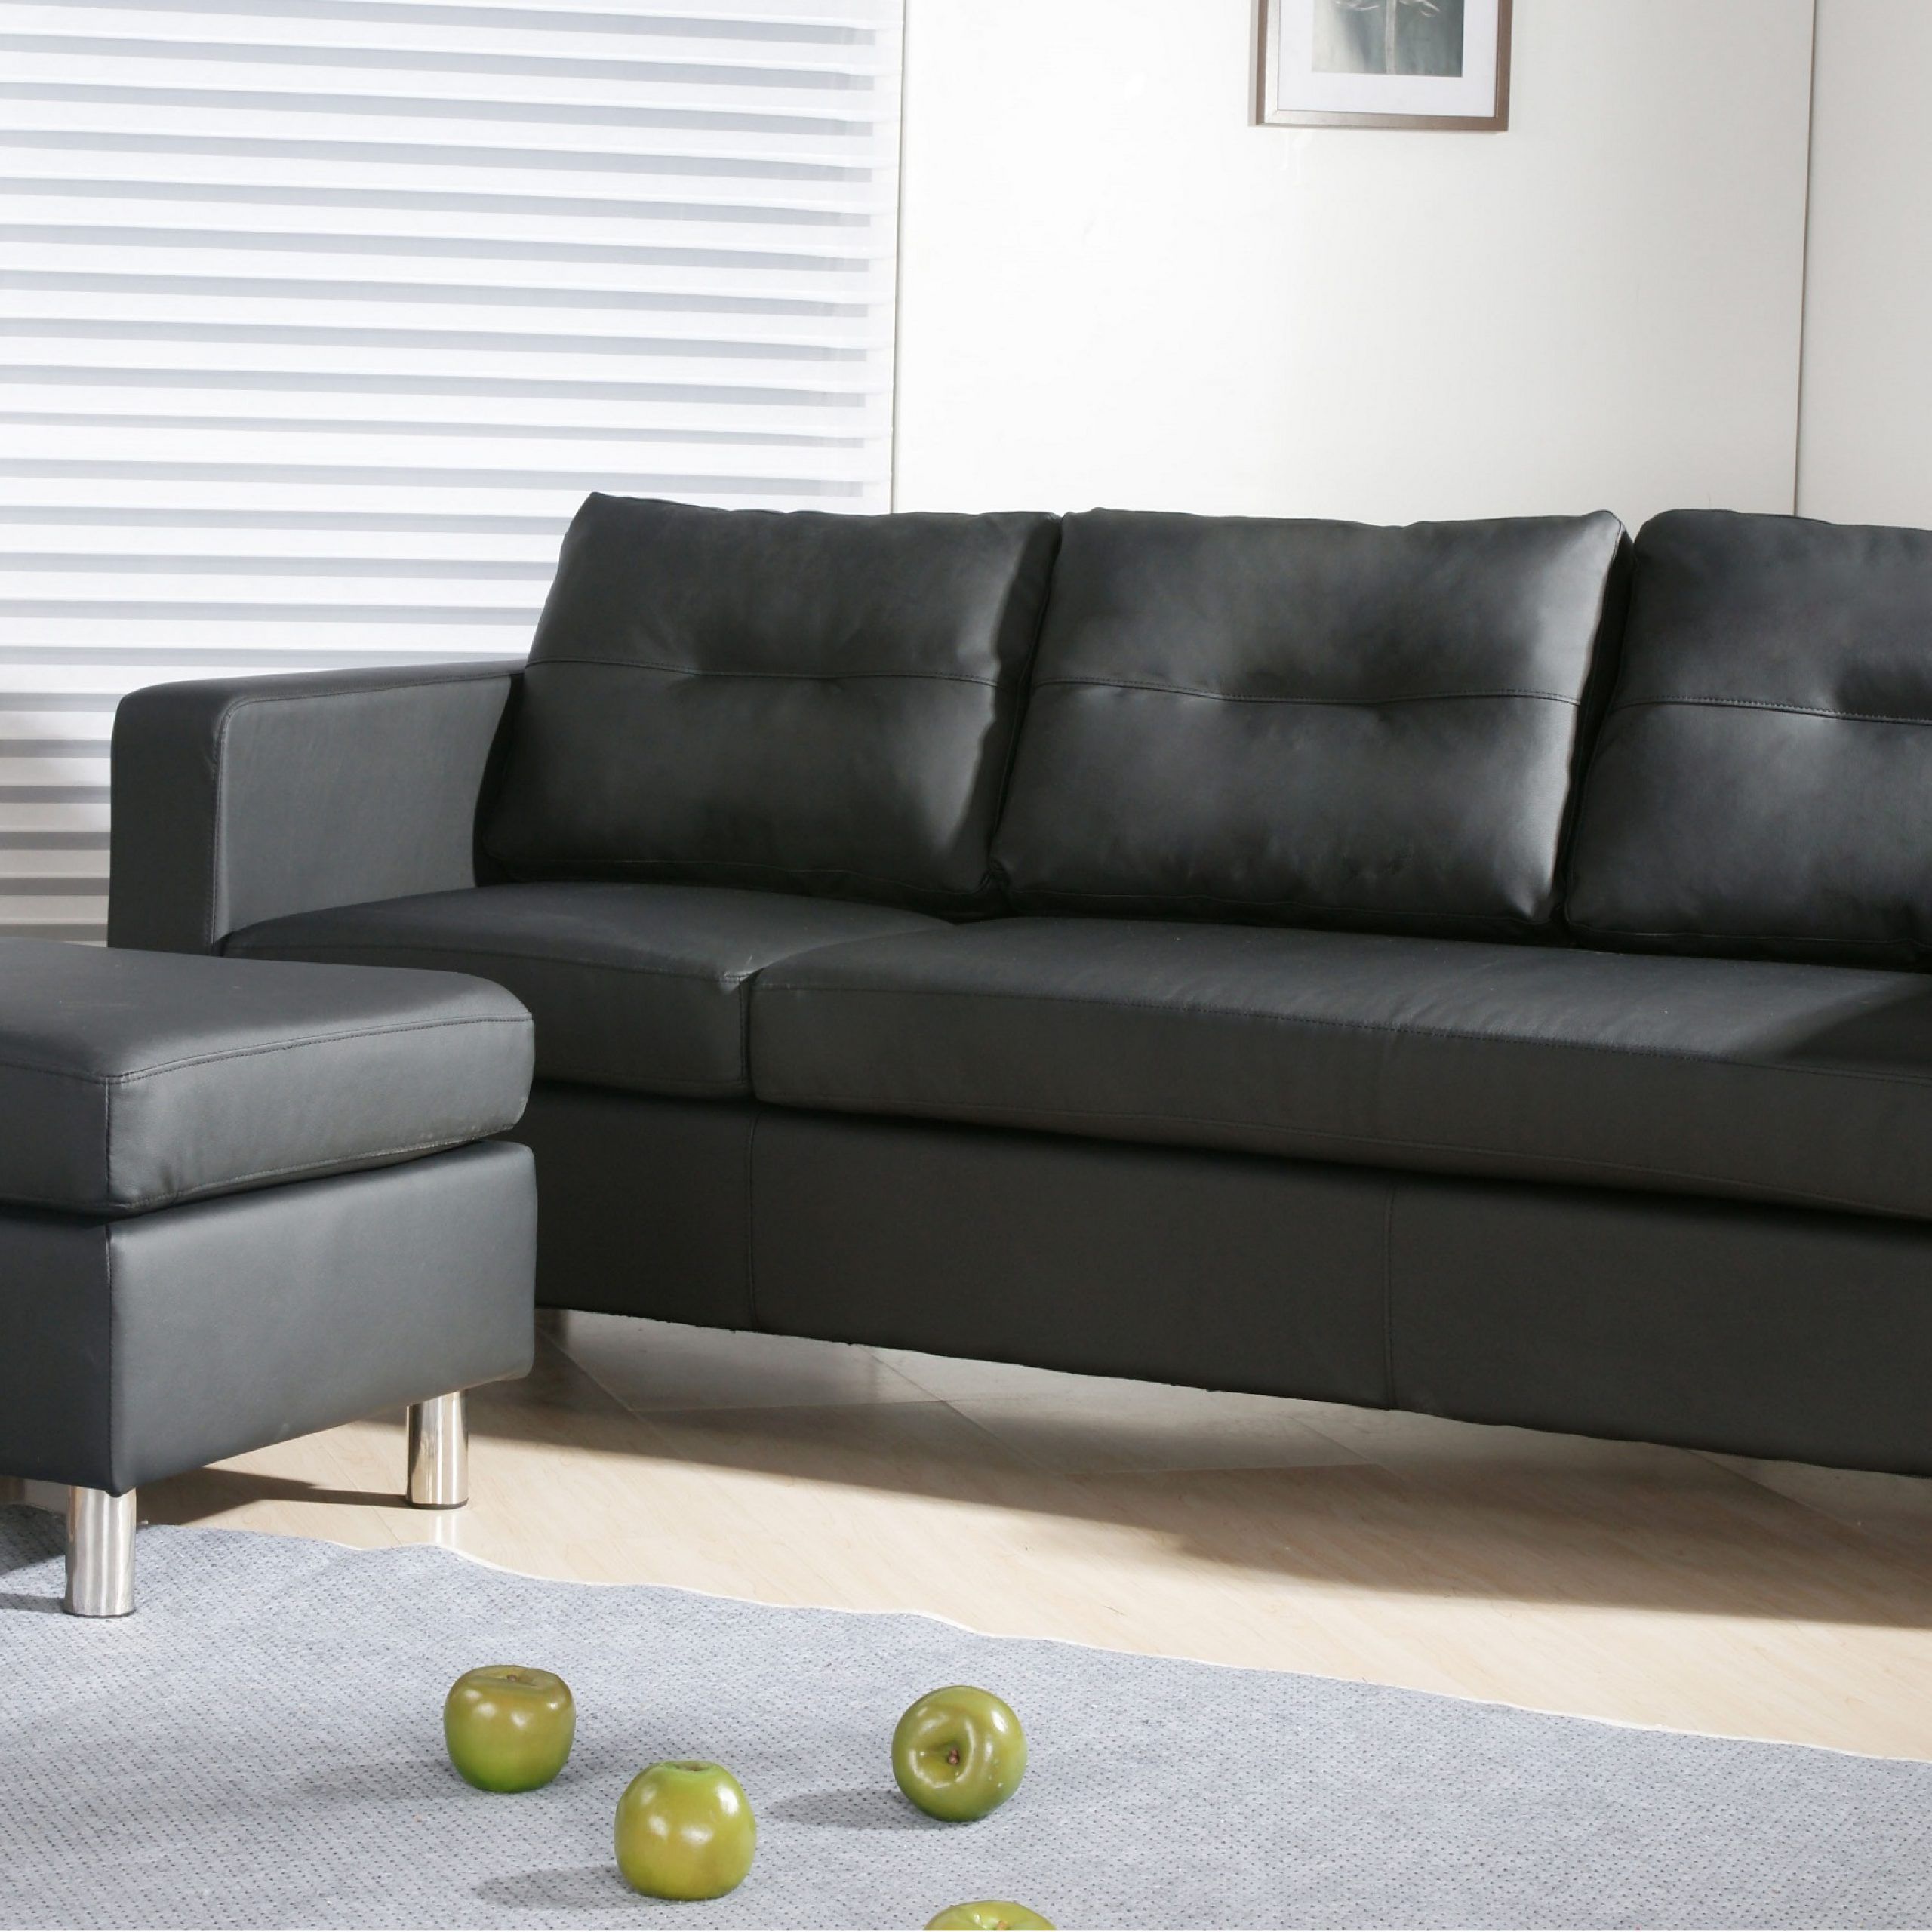 Caius Modern Faux Leather Configurable Left And Right Intended For Wynne Contemporary Sectional Sofas Black (View 1 of 15)